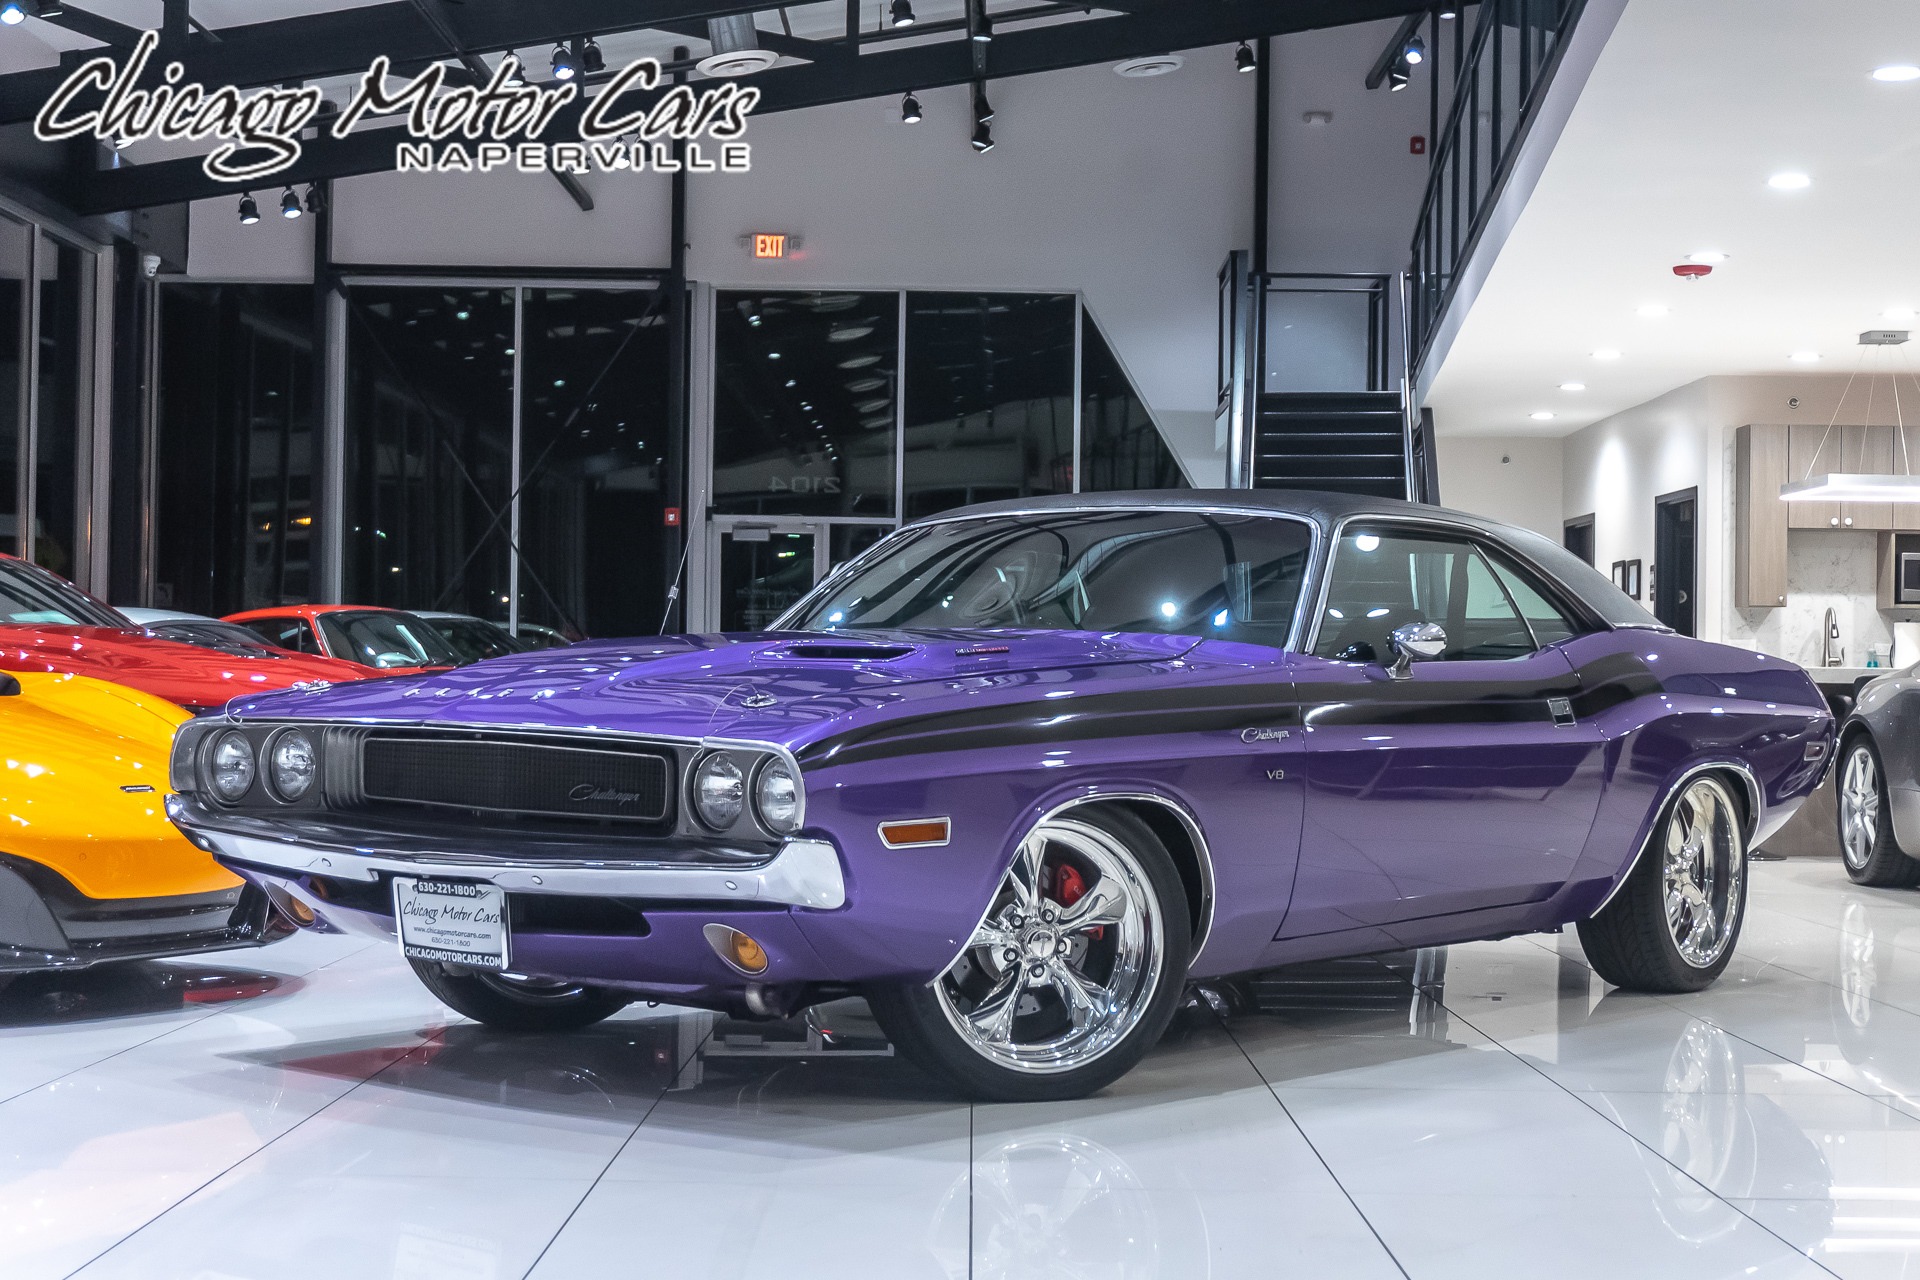 Used-1970-Dodge-Challenger-Coupe-360CI-FI-TECH-FUEL-INJECTED-RESTORED